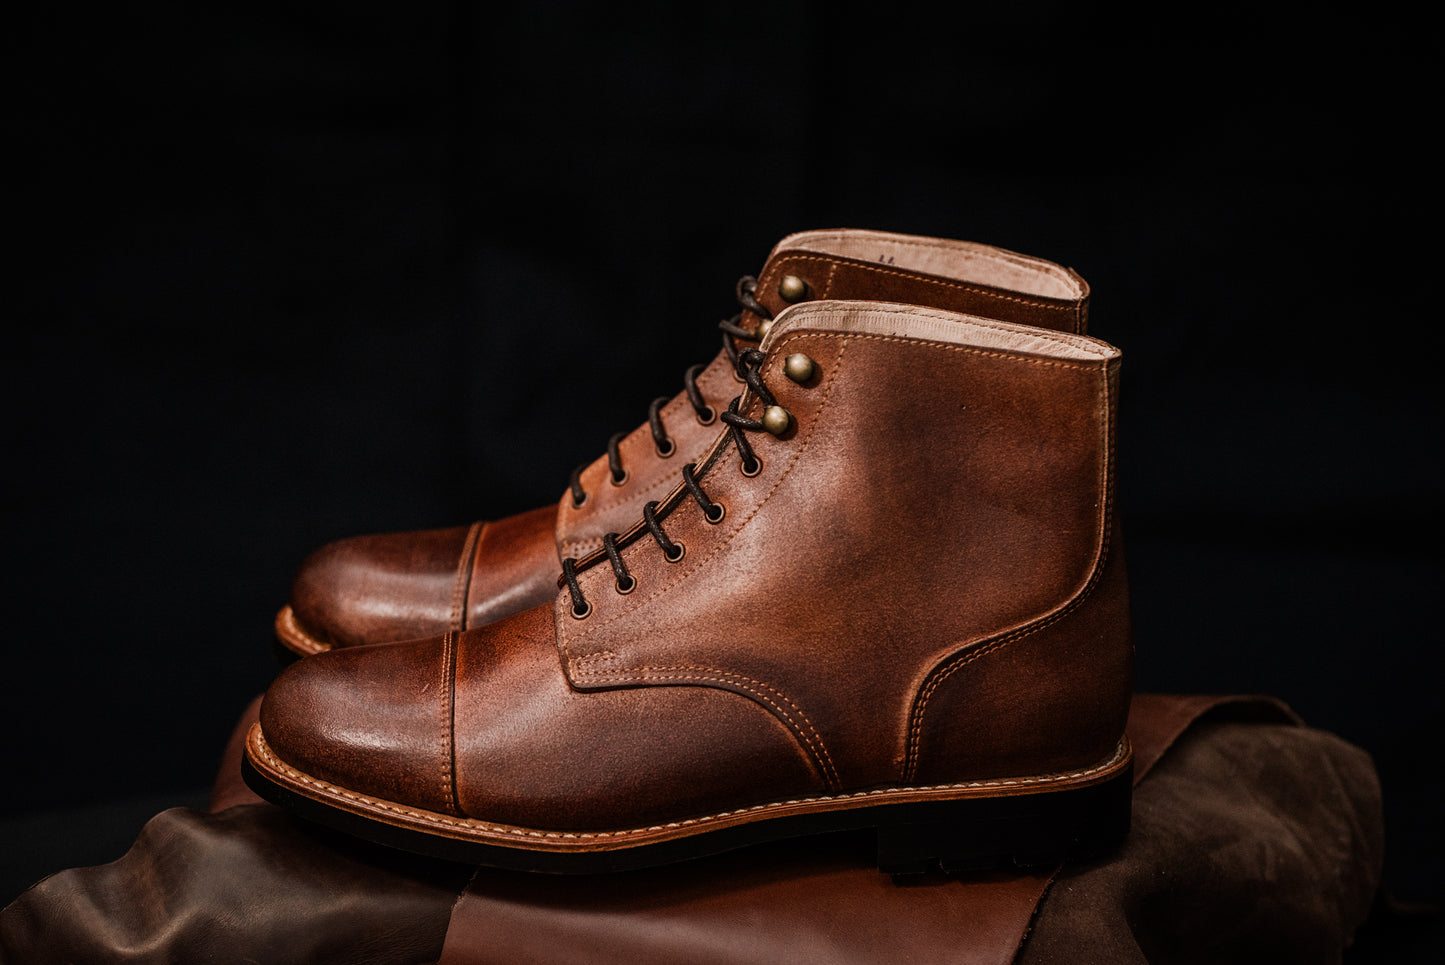 Tejo Boots Military Sole - OldMulla - Boots Store, Handmade By George Family